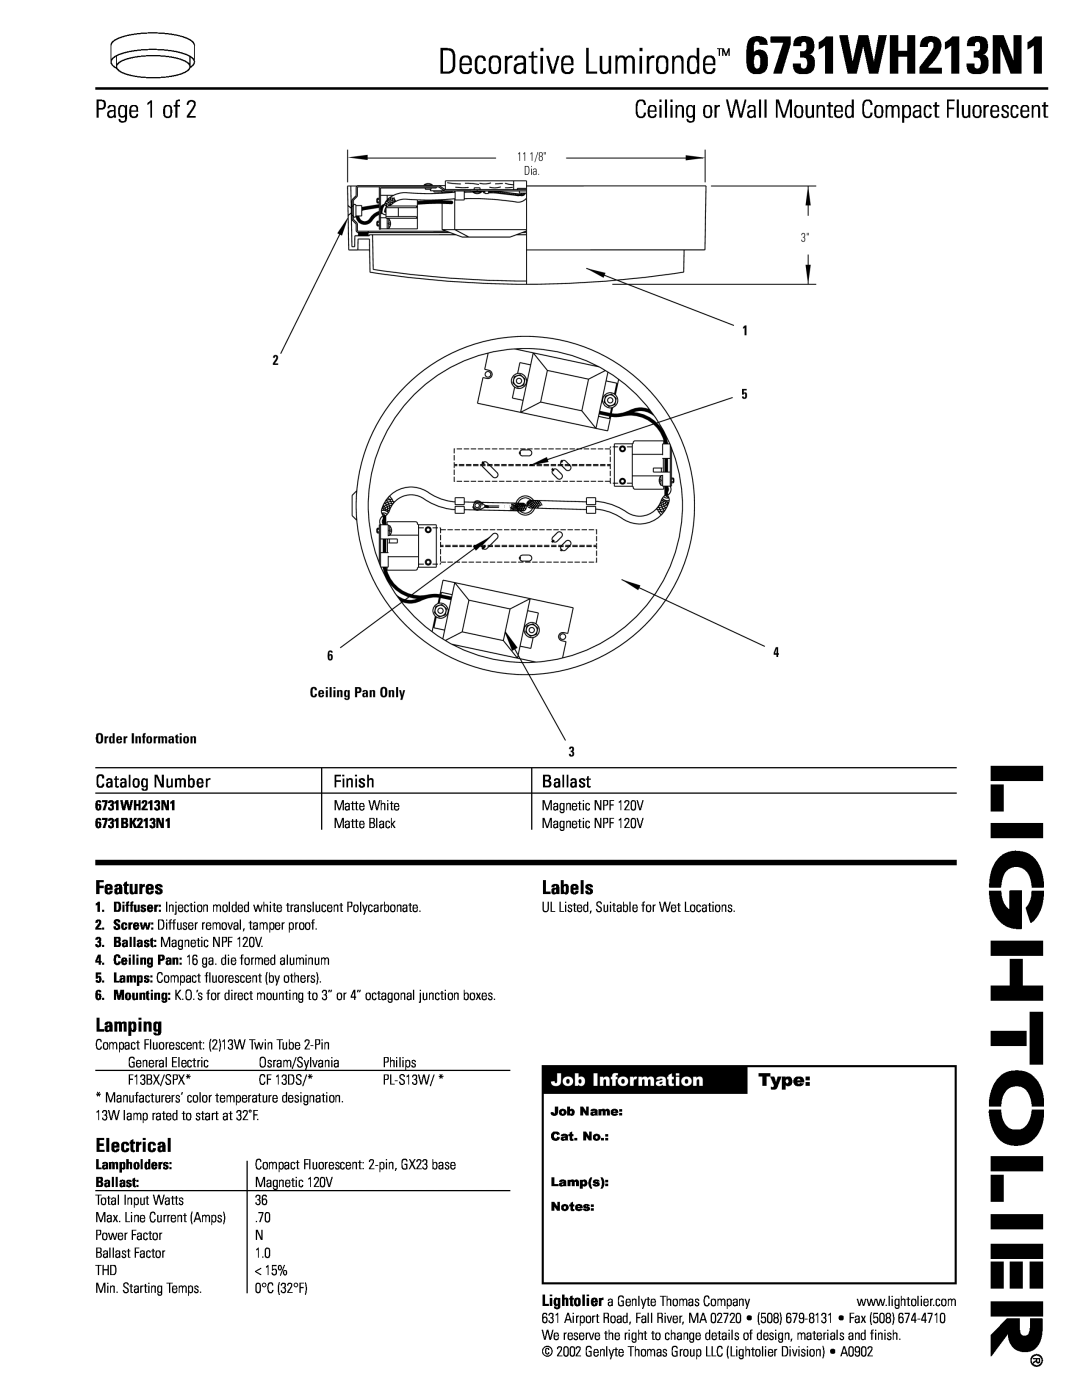 Lightolier manual Decorative Lumironde 6731WH213N1, Page 1 of, Ceiling or Wall Mounted Compact Fluorescent, Finish 